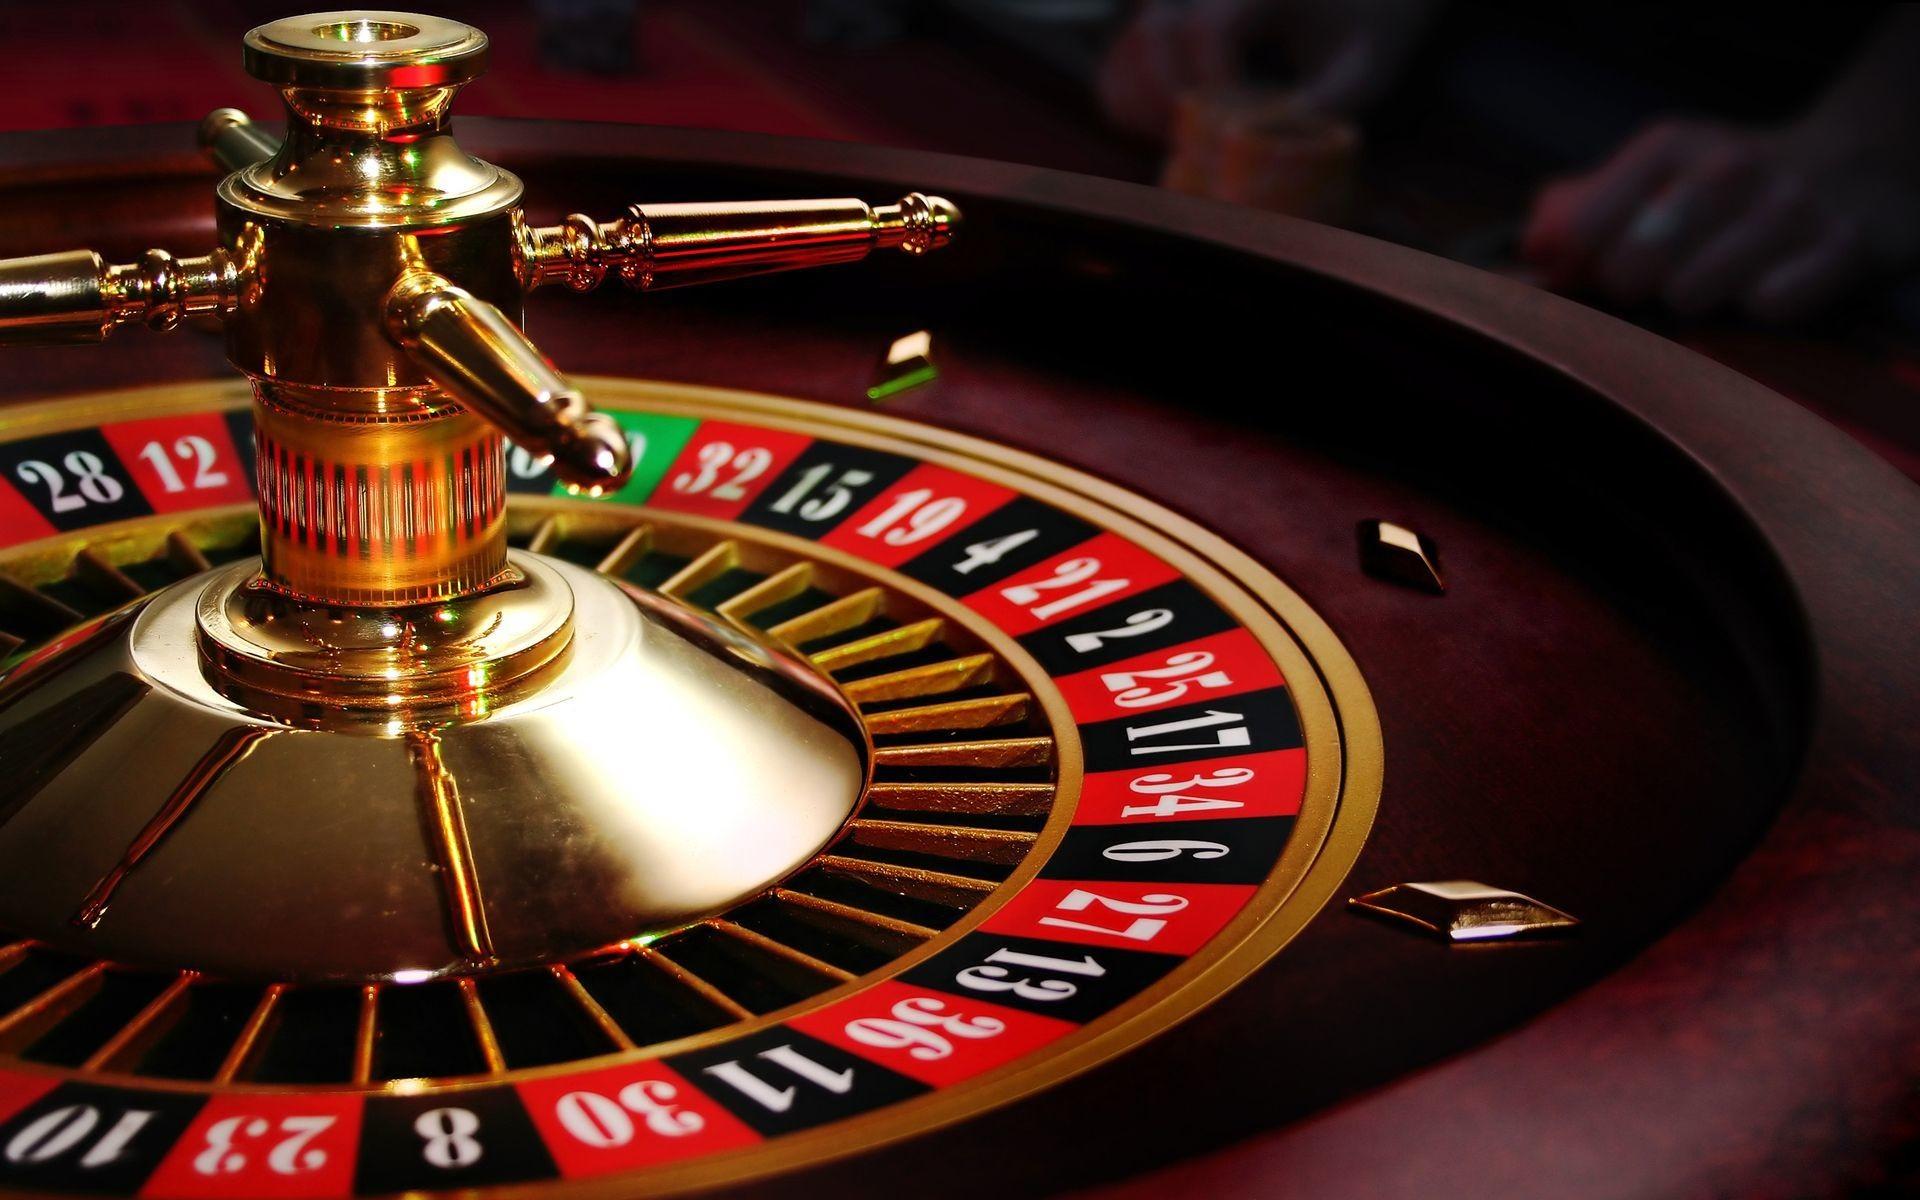 RTP Slots: The Best Odds in the Casino?